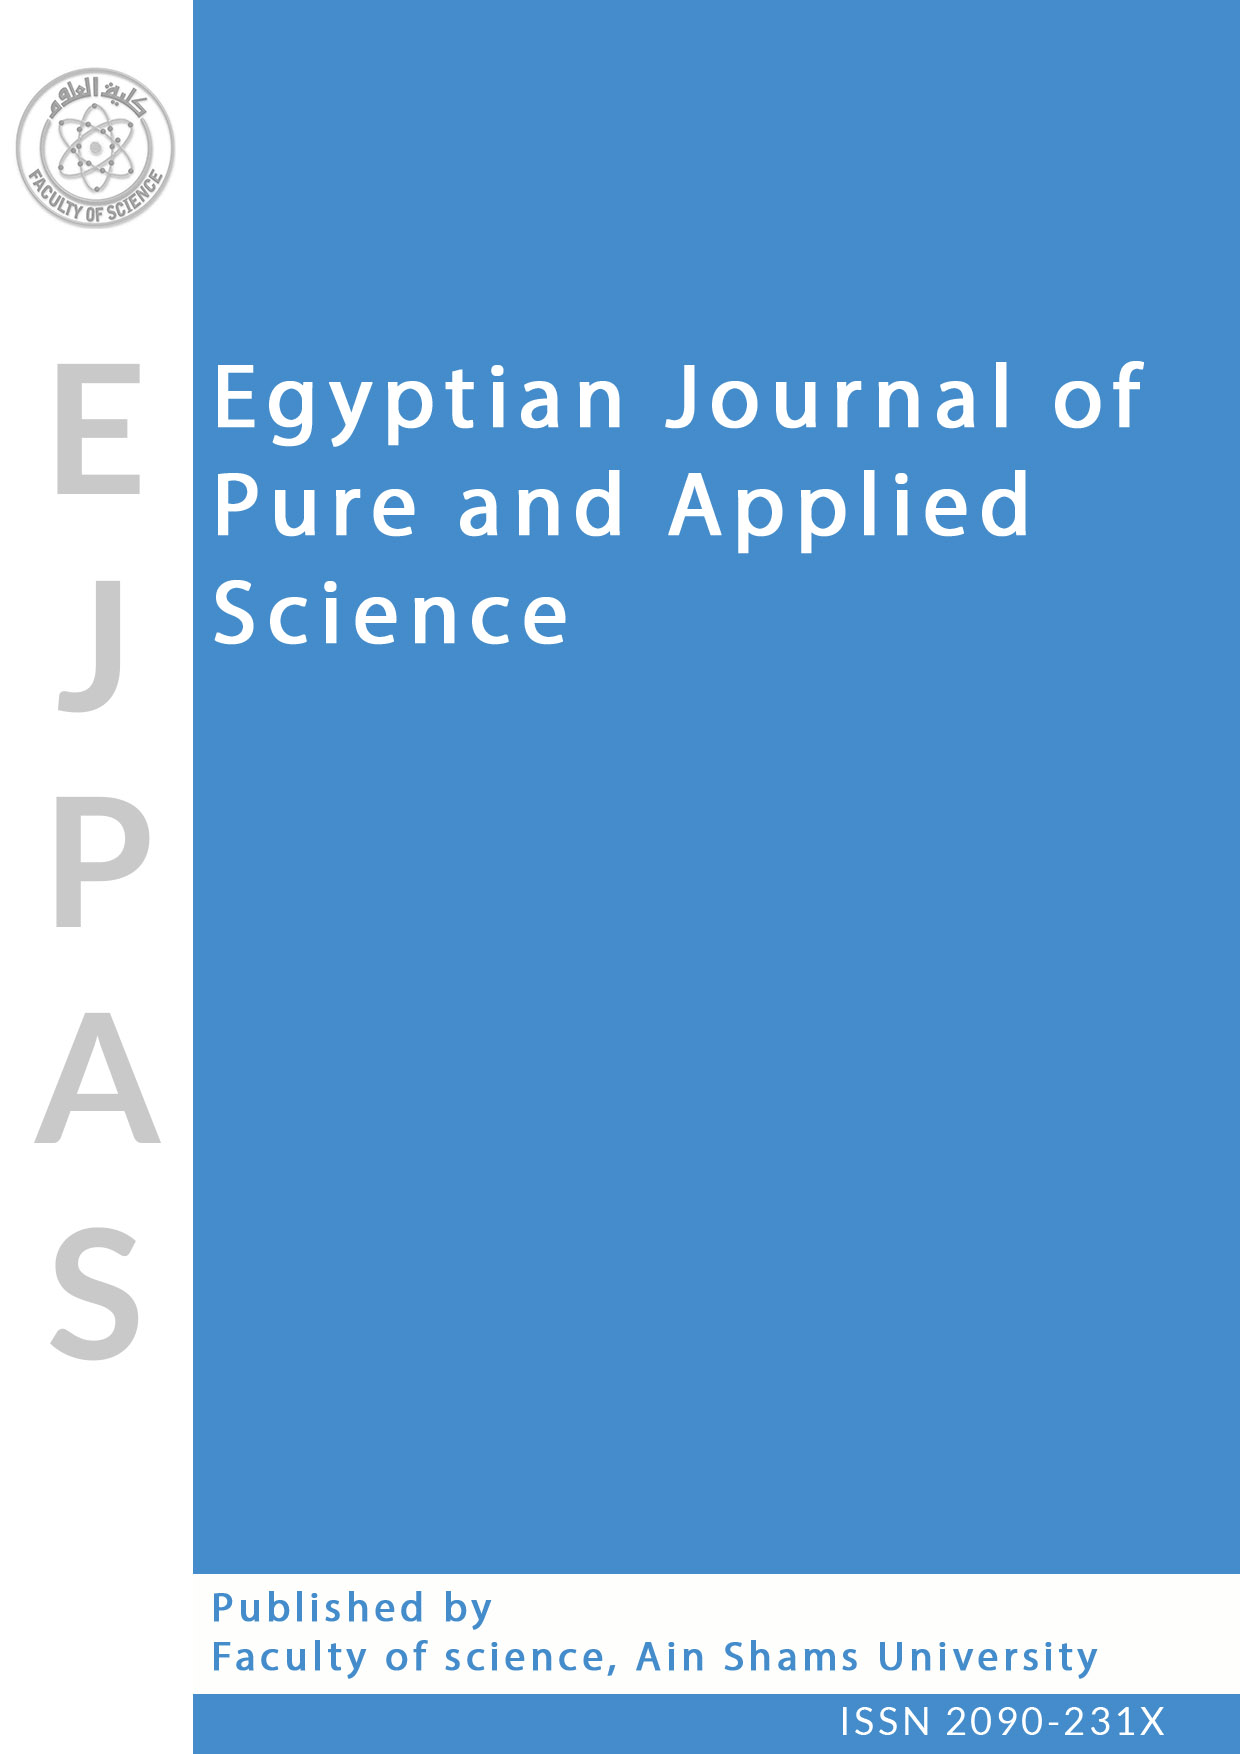 Egyptian Journal of Pure and Applied Science